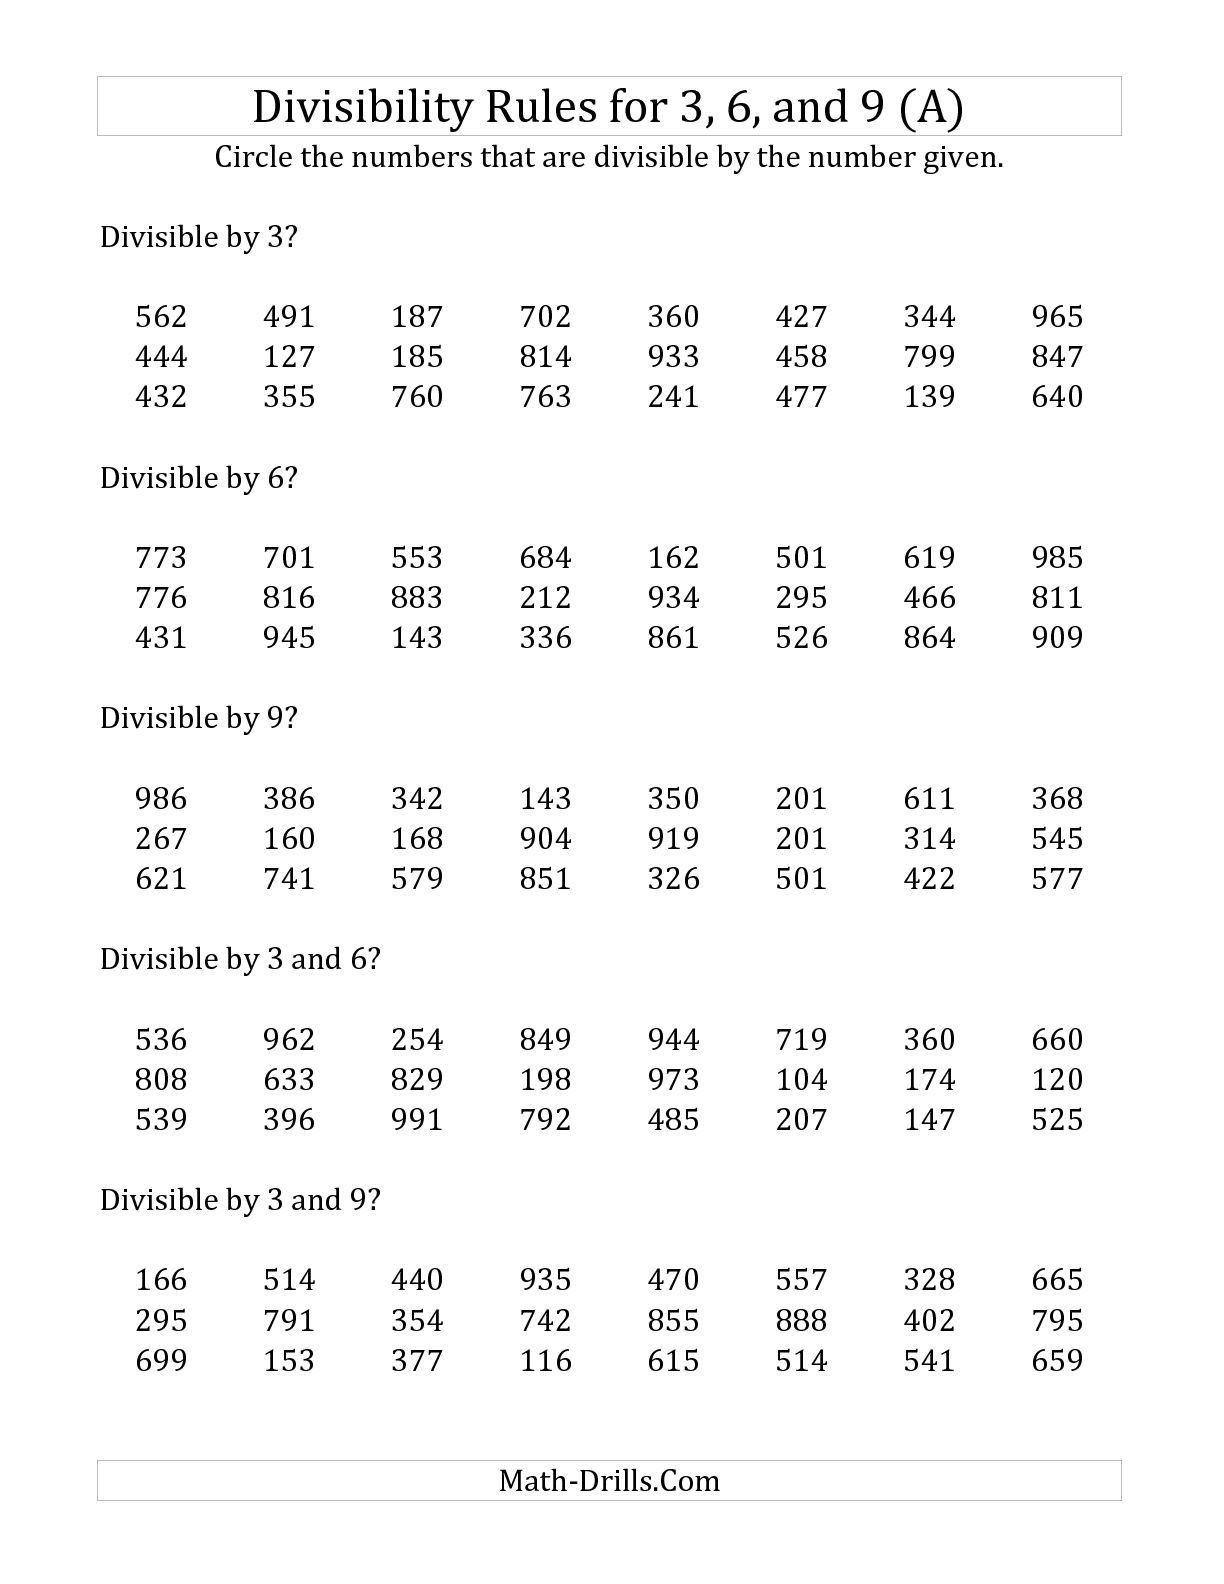 Divisibility Rules Worksheet Pdf amulette